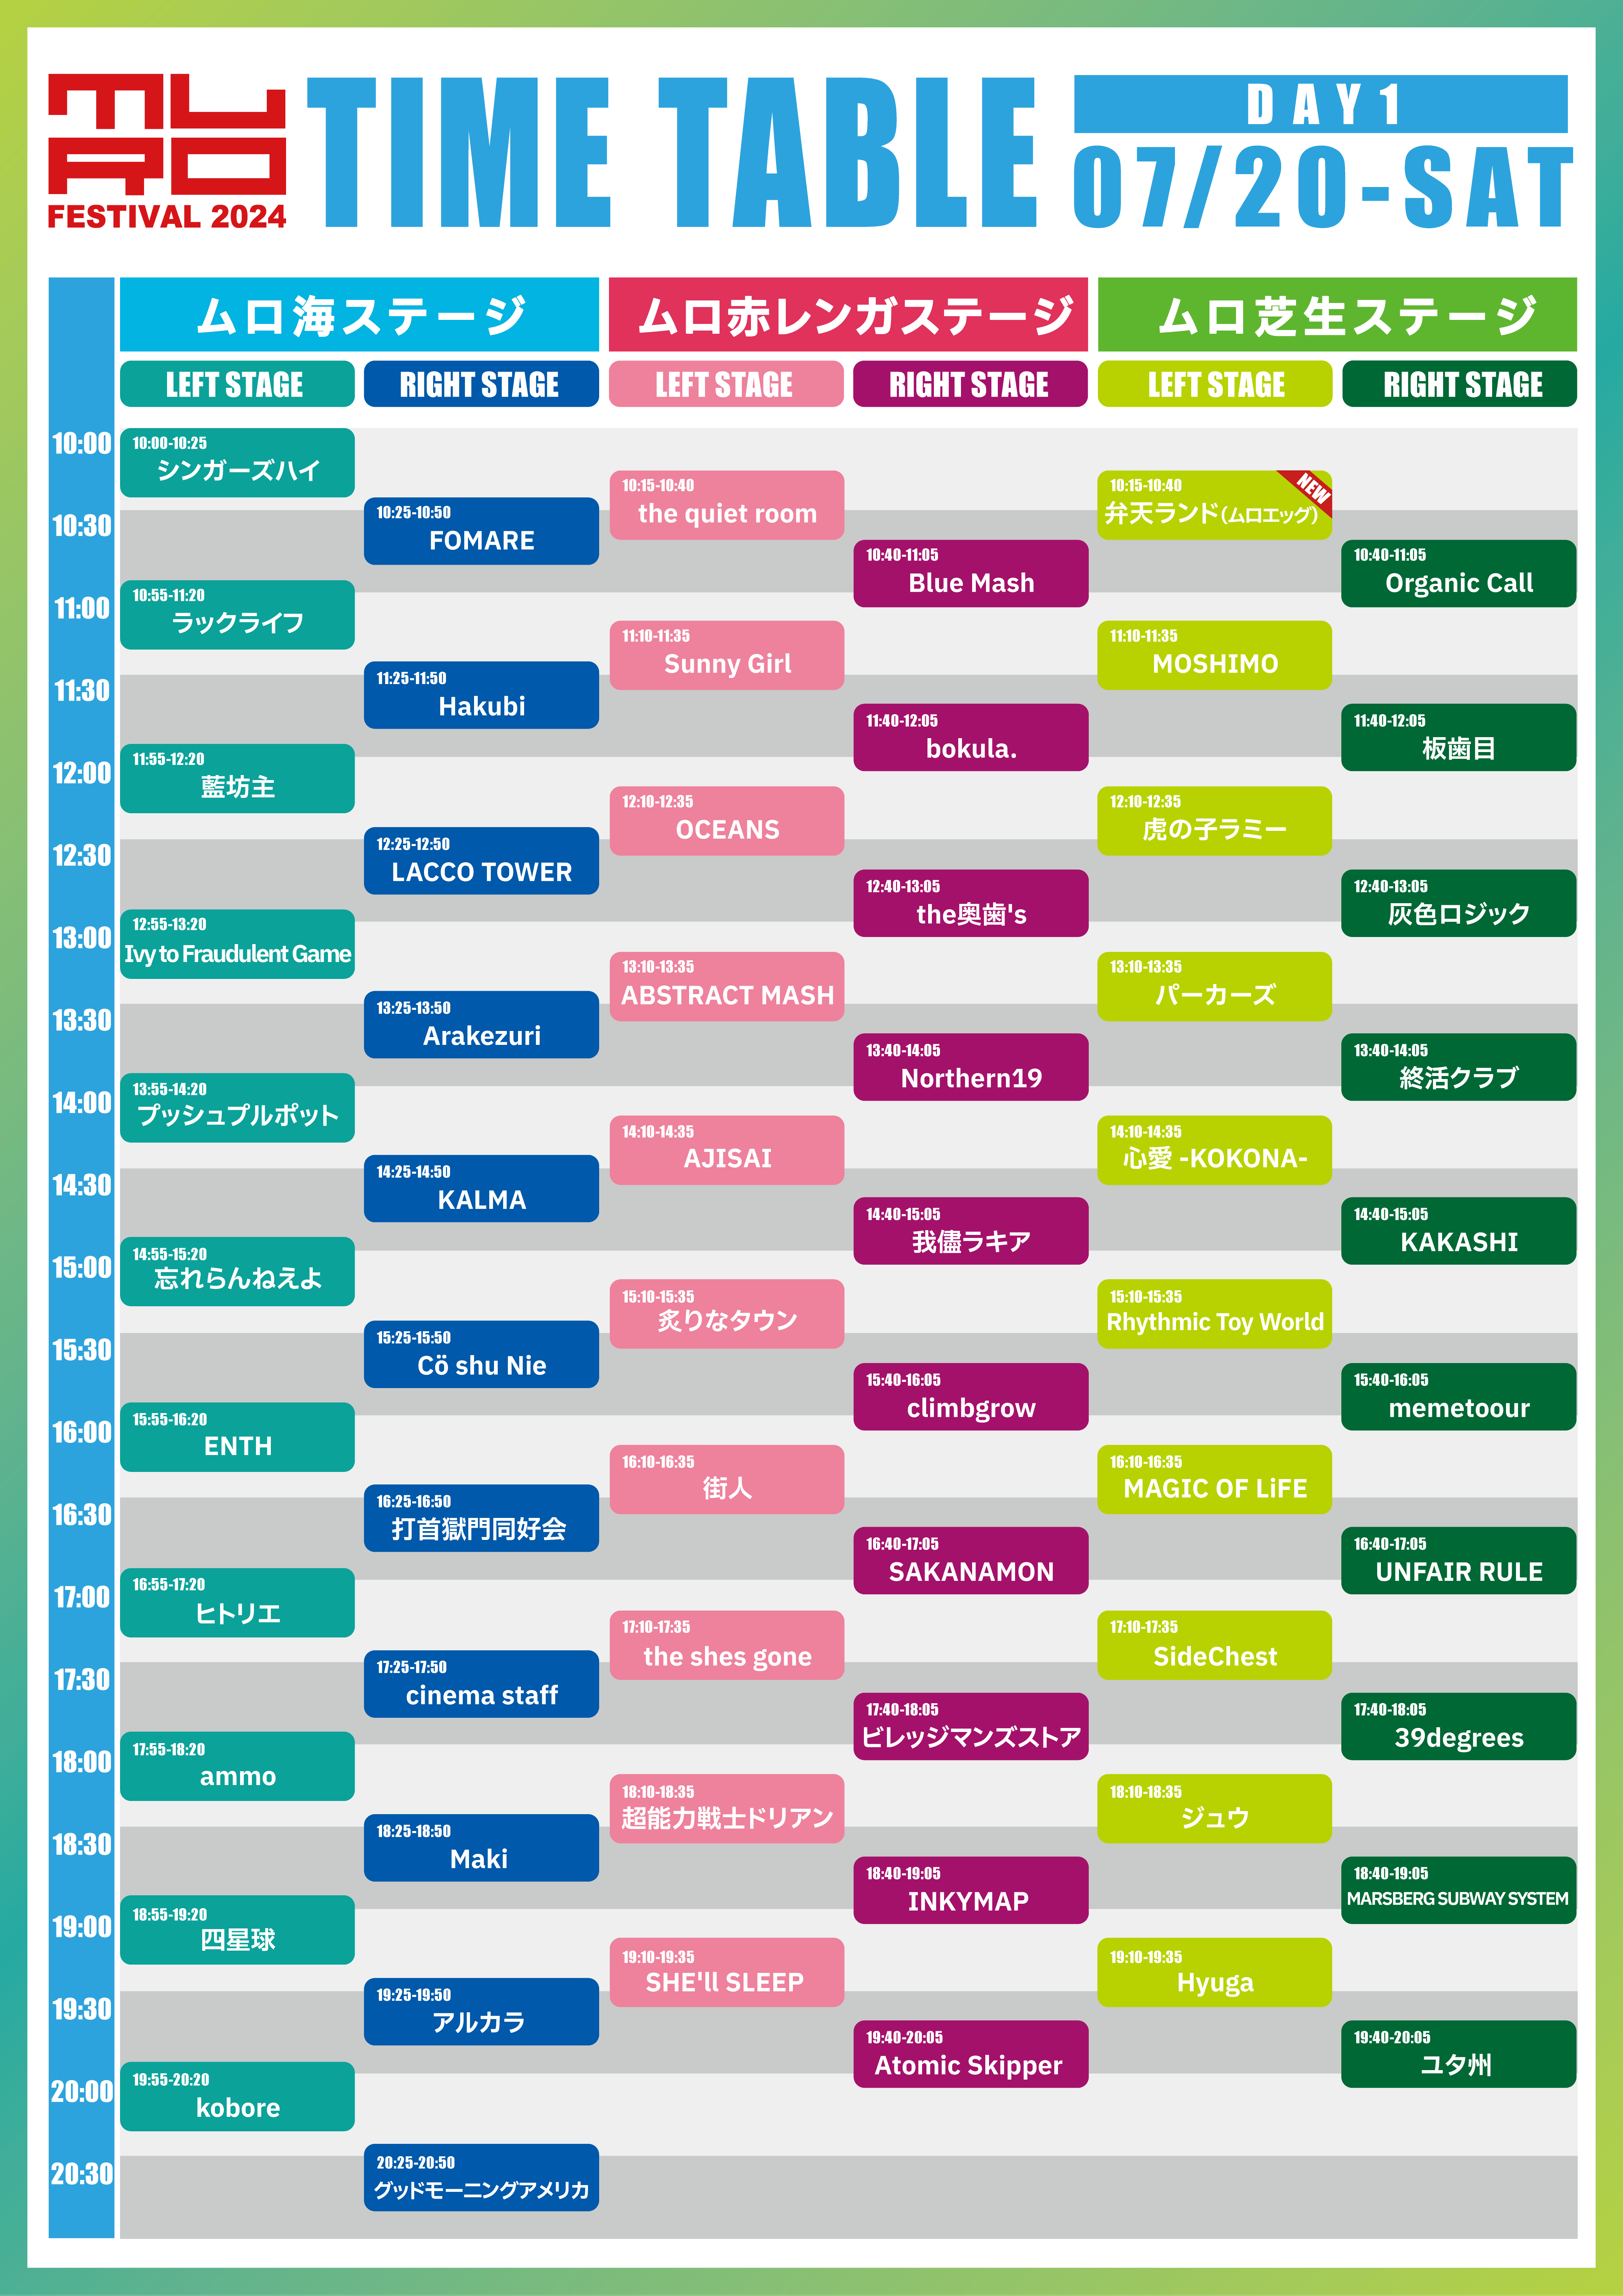 Timetable Day1